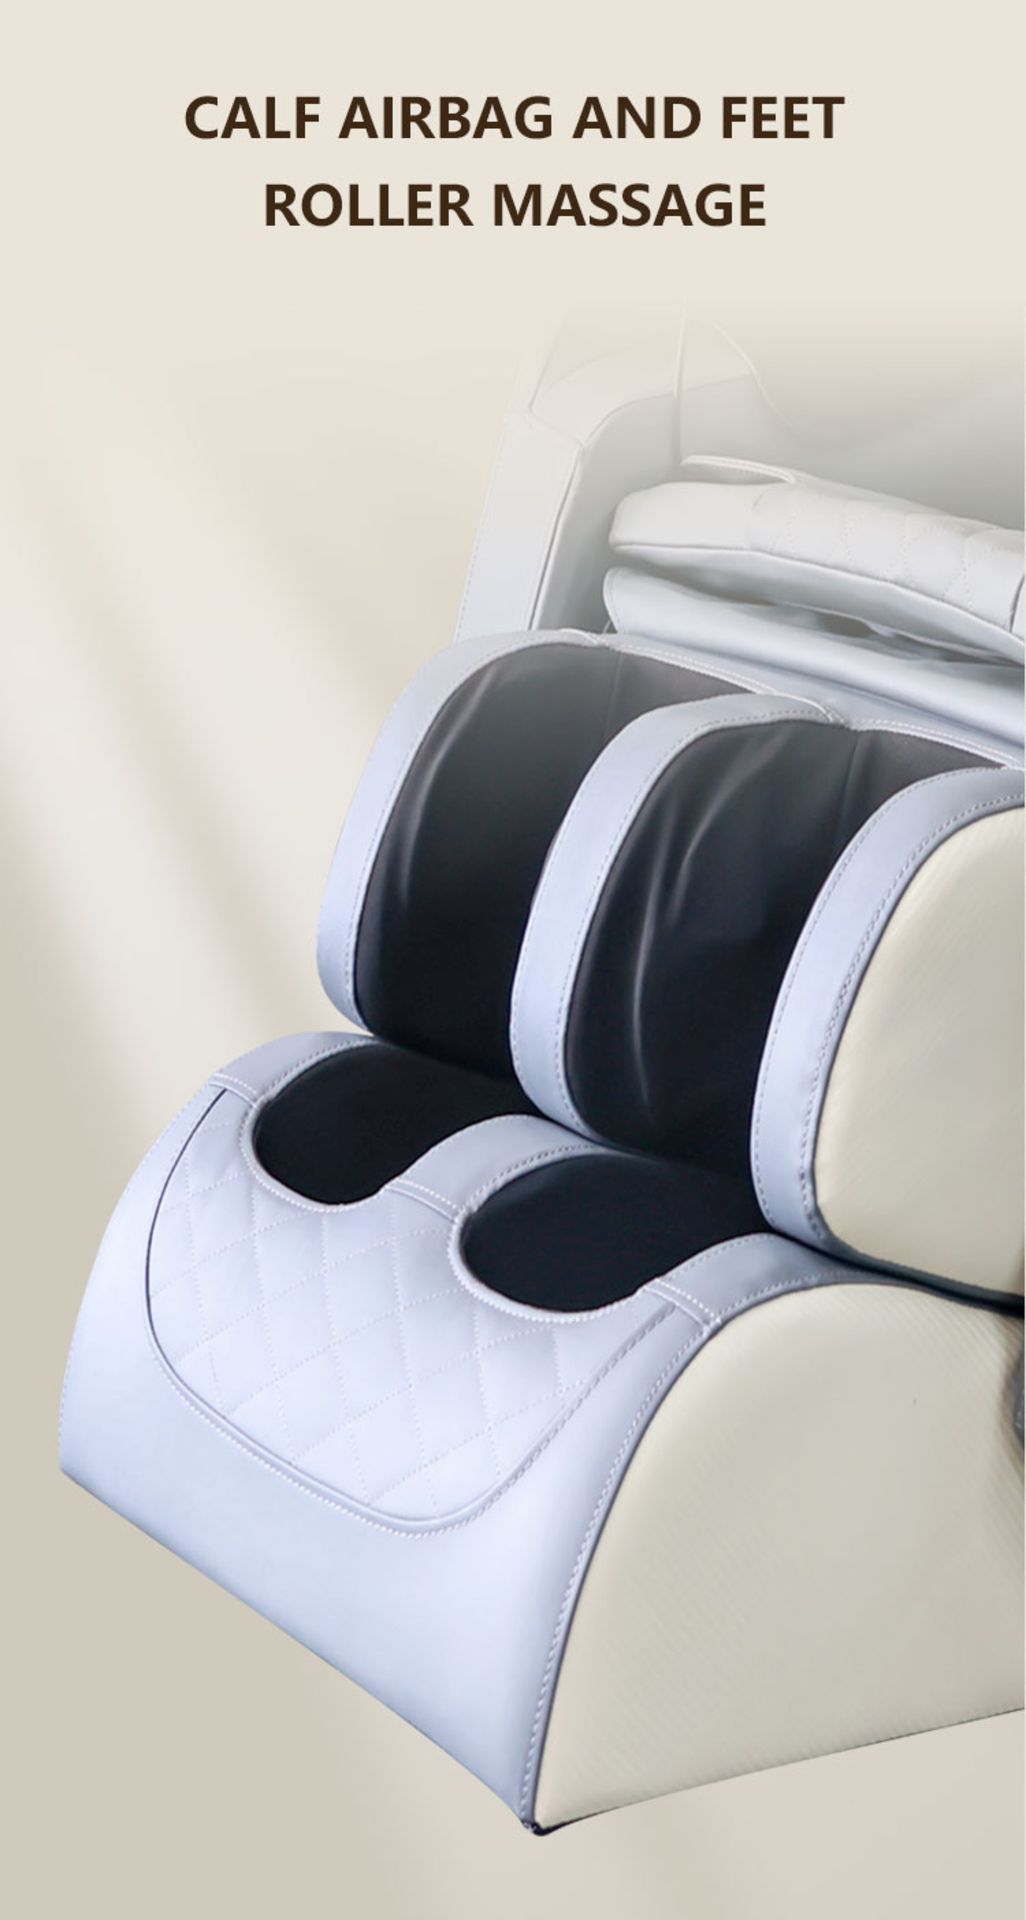 Brand New in Box Orchid Blue/Black MiComfort Full Body Massage Chair RRP £2199 *NO VAT* - Image 7 of 14